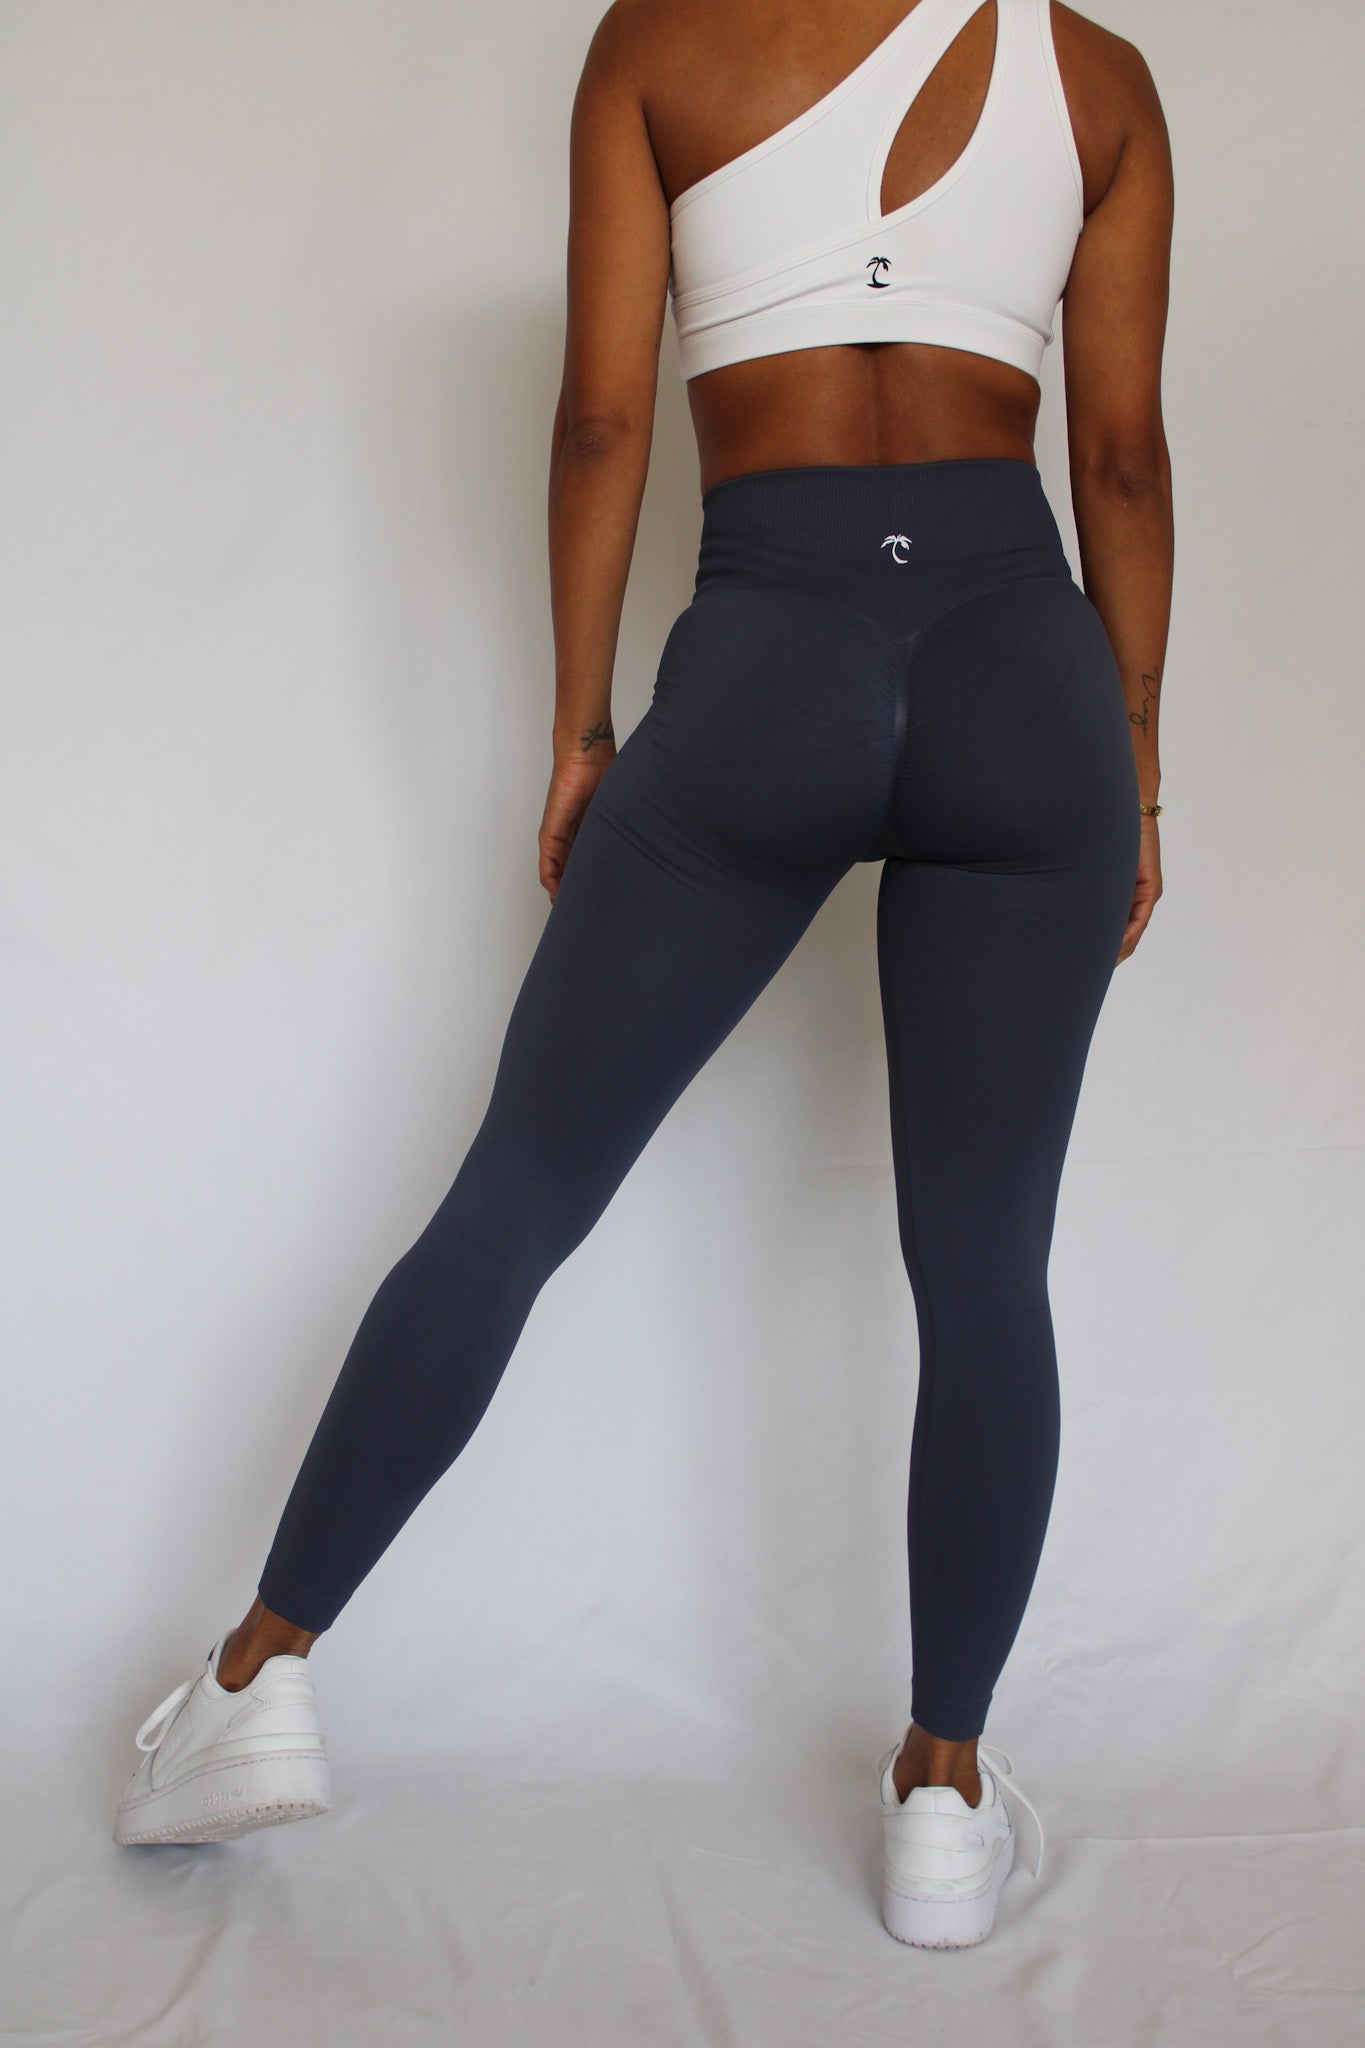 Seamless leggings PUSH UP modeling and slimming, SUNNY K113 dusty